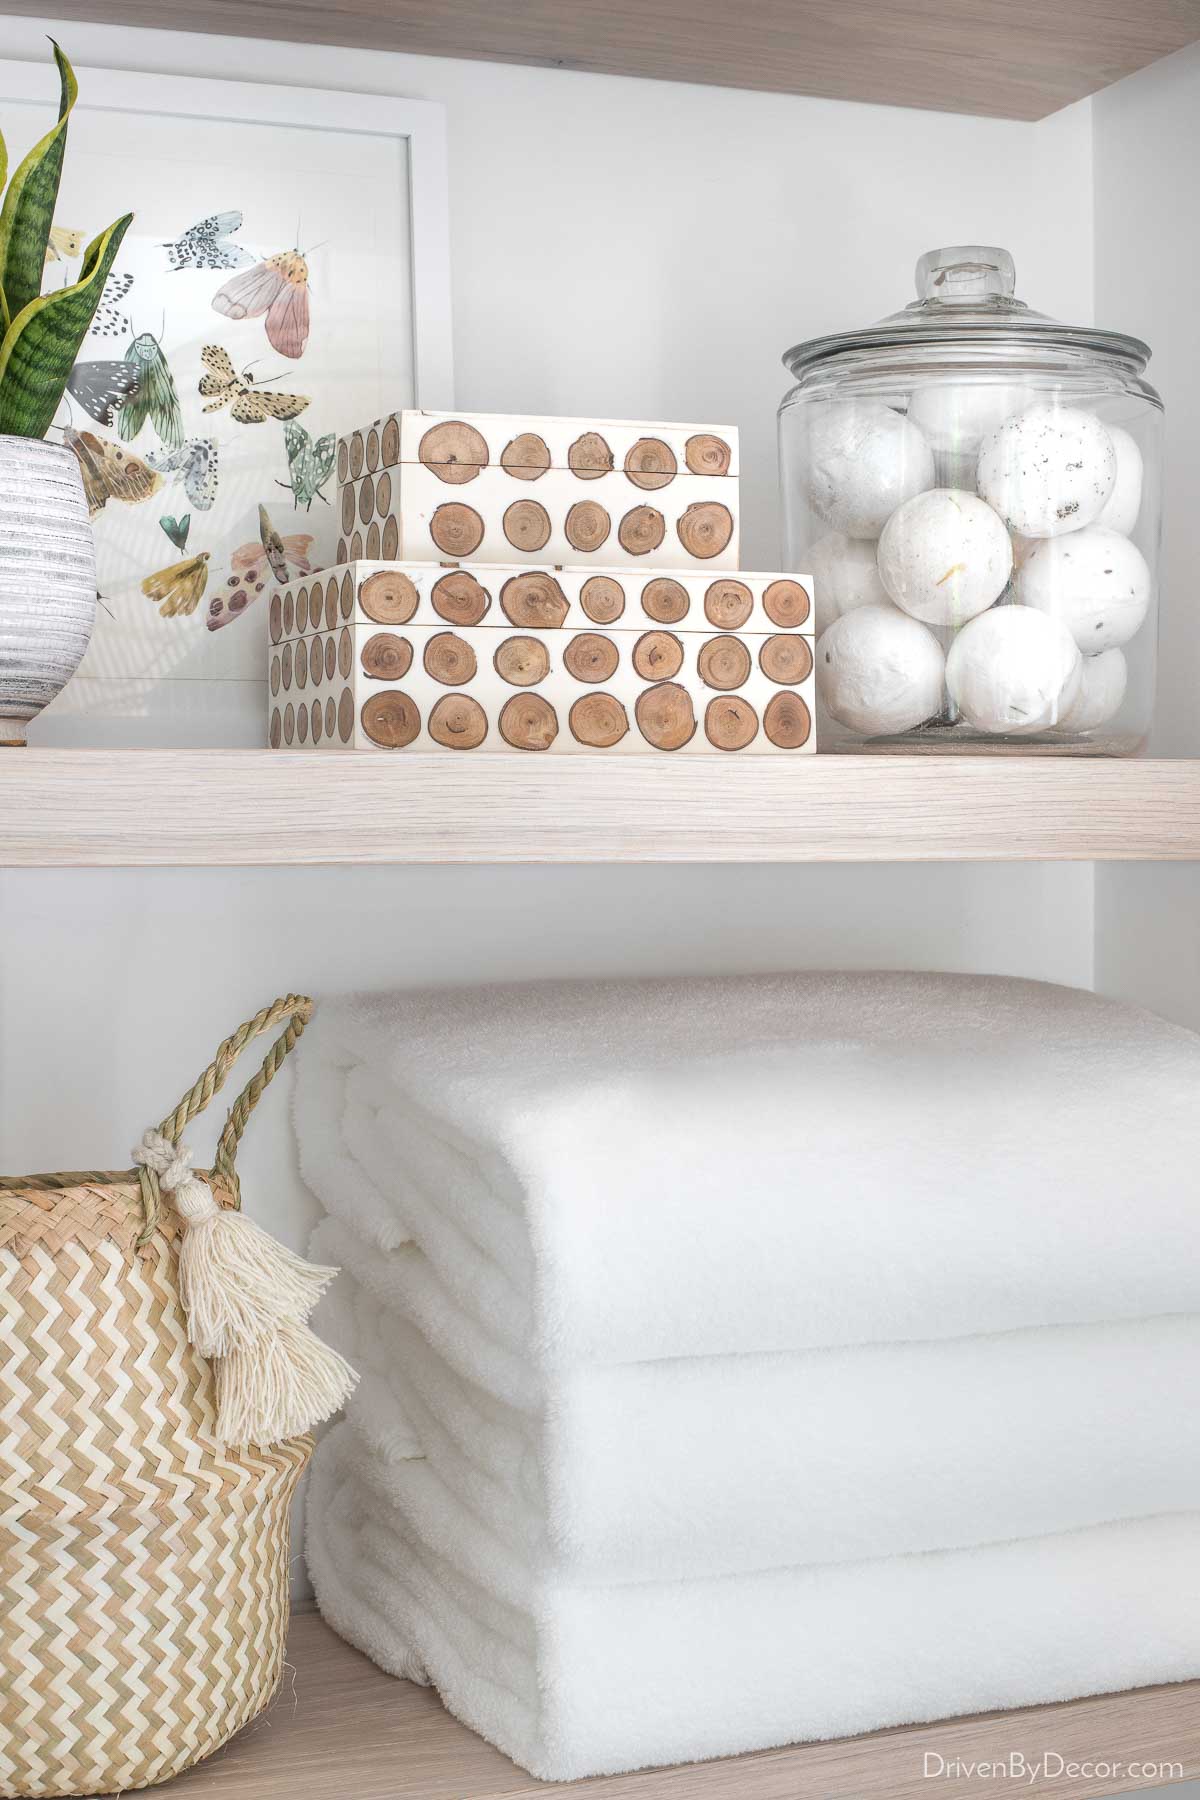 The best towels if you're looking for luxuriously soft, fluffy, and absorbent towels!